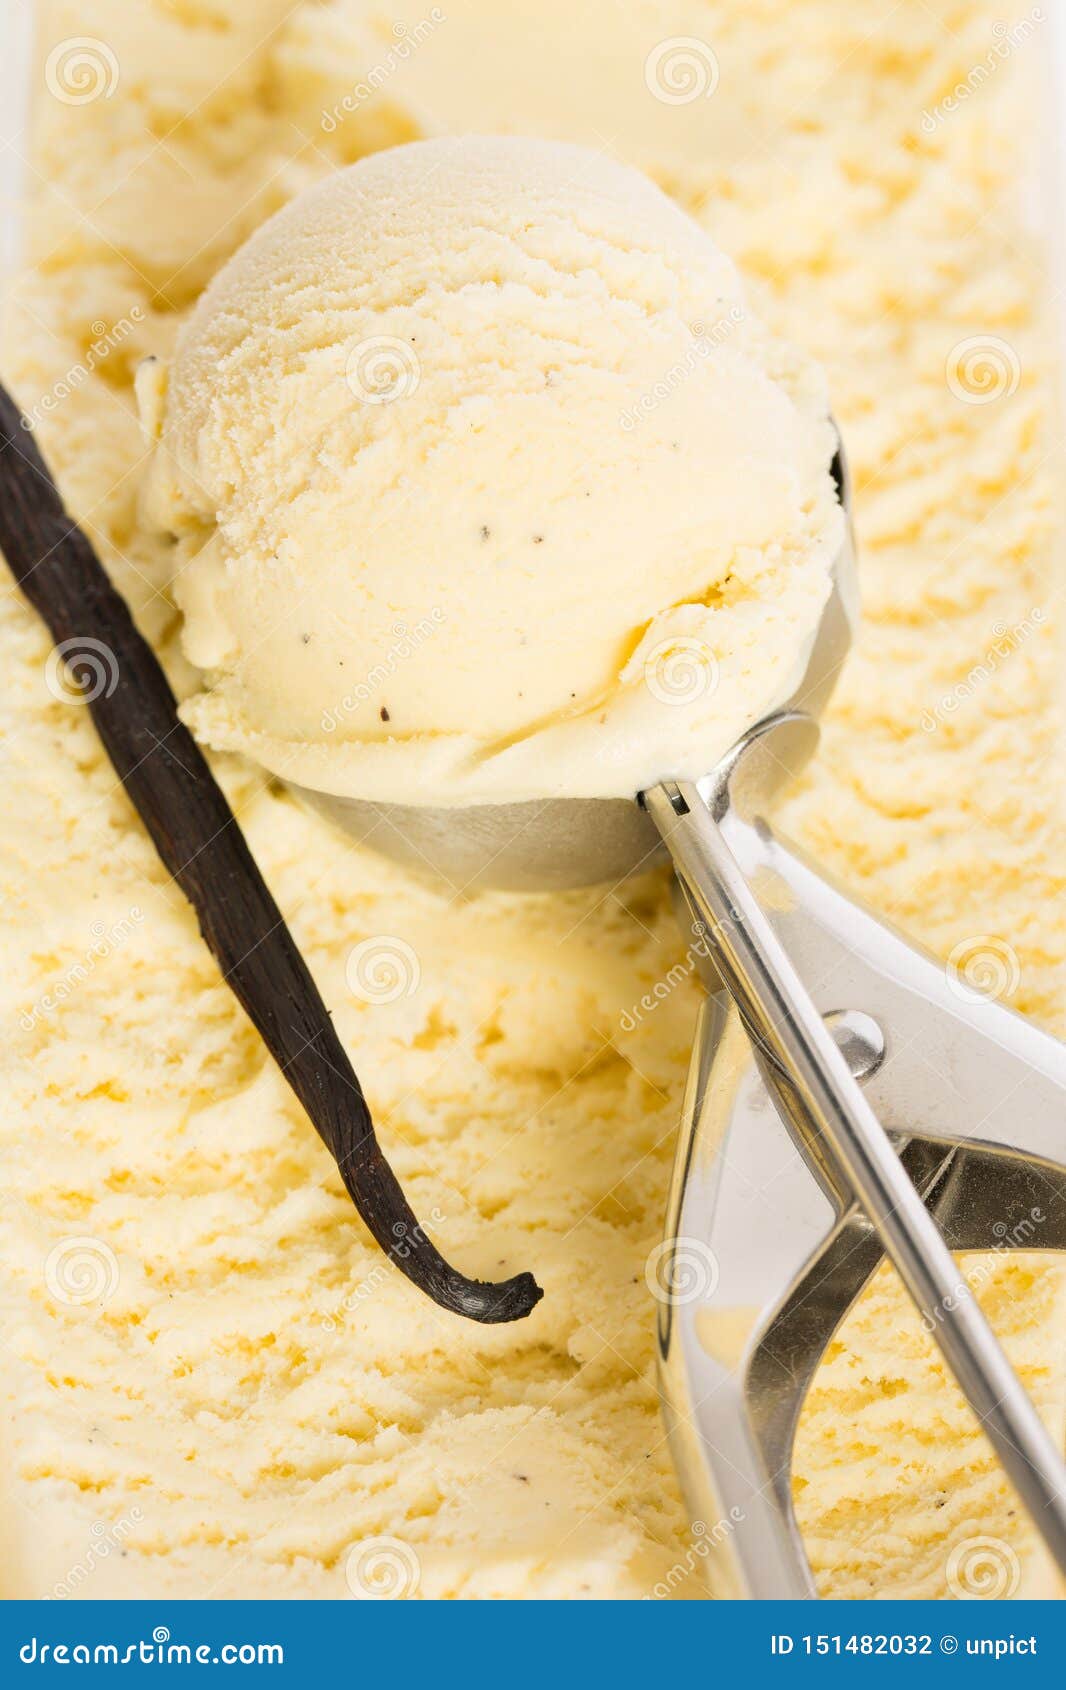 råolie dø lomme Spoonful Of Ice Cream